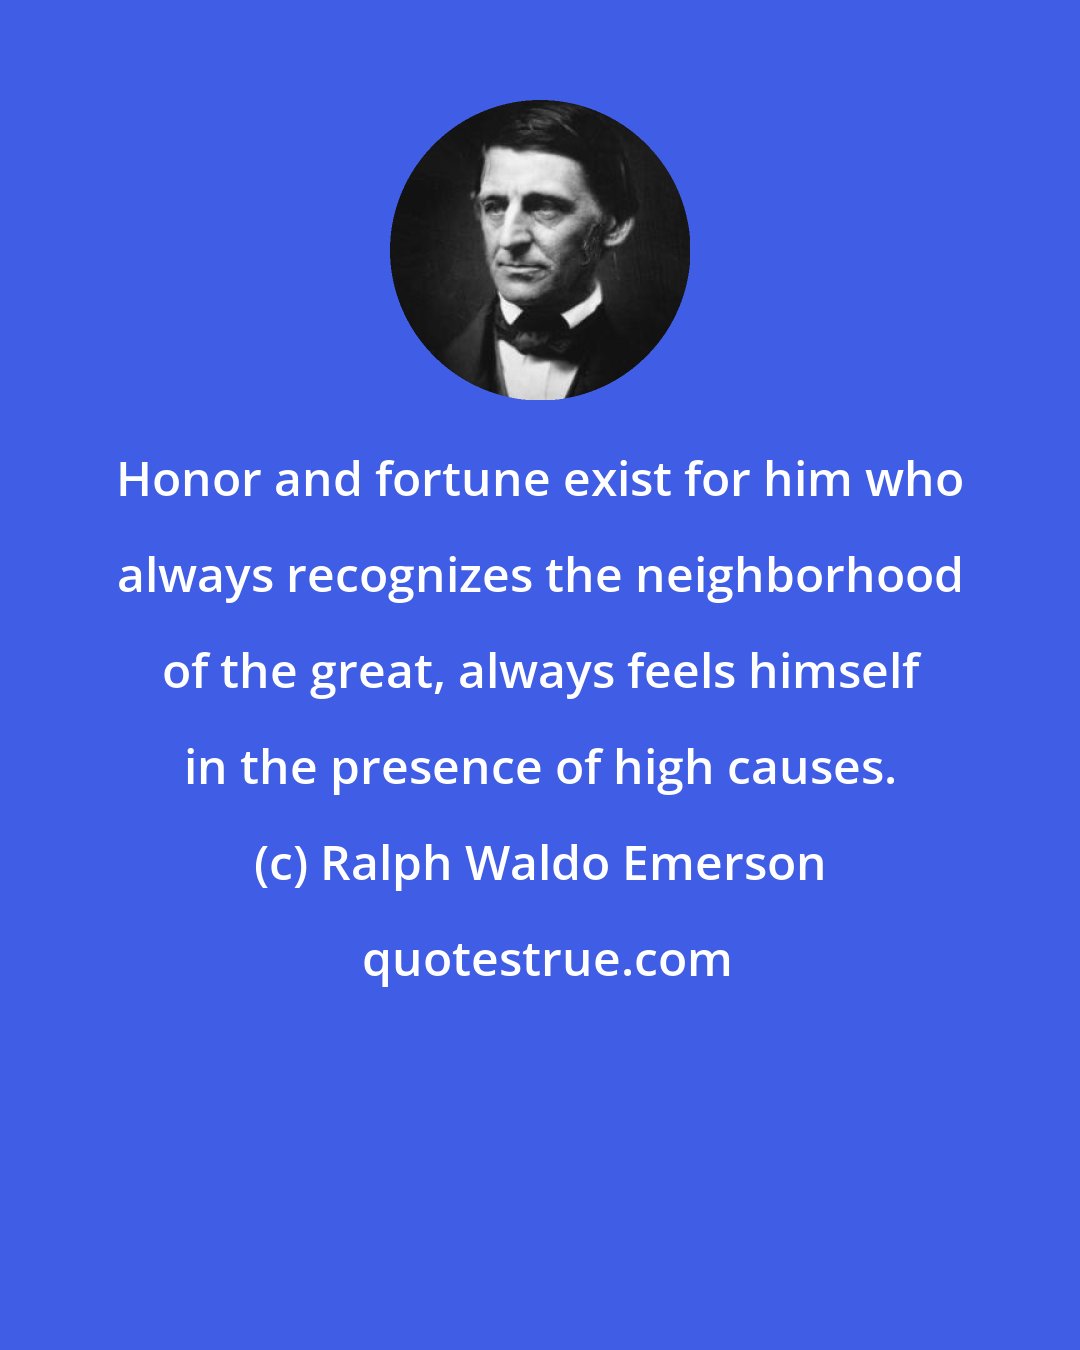 Ralph Waldo Emerson: Honor and fortune exist for him who always recognizes the neighborhood of the great, always feels himself in the presence of high causes.